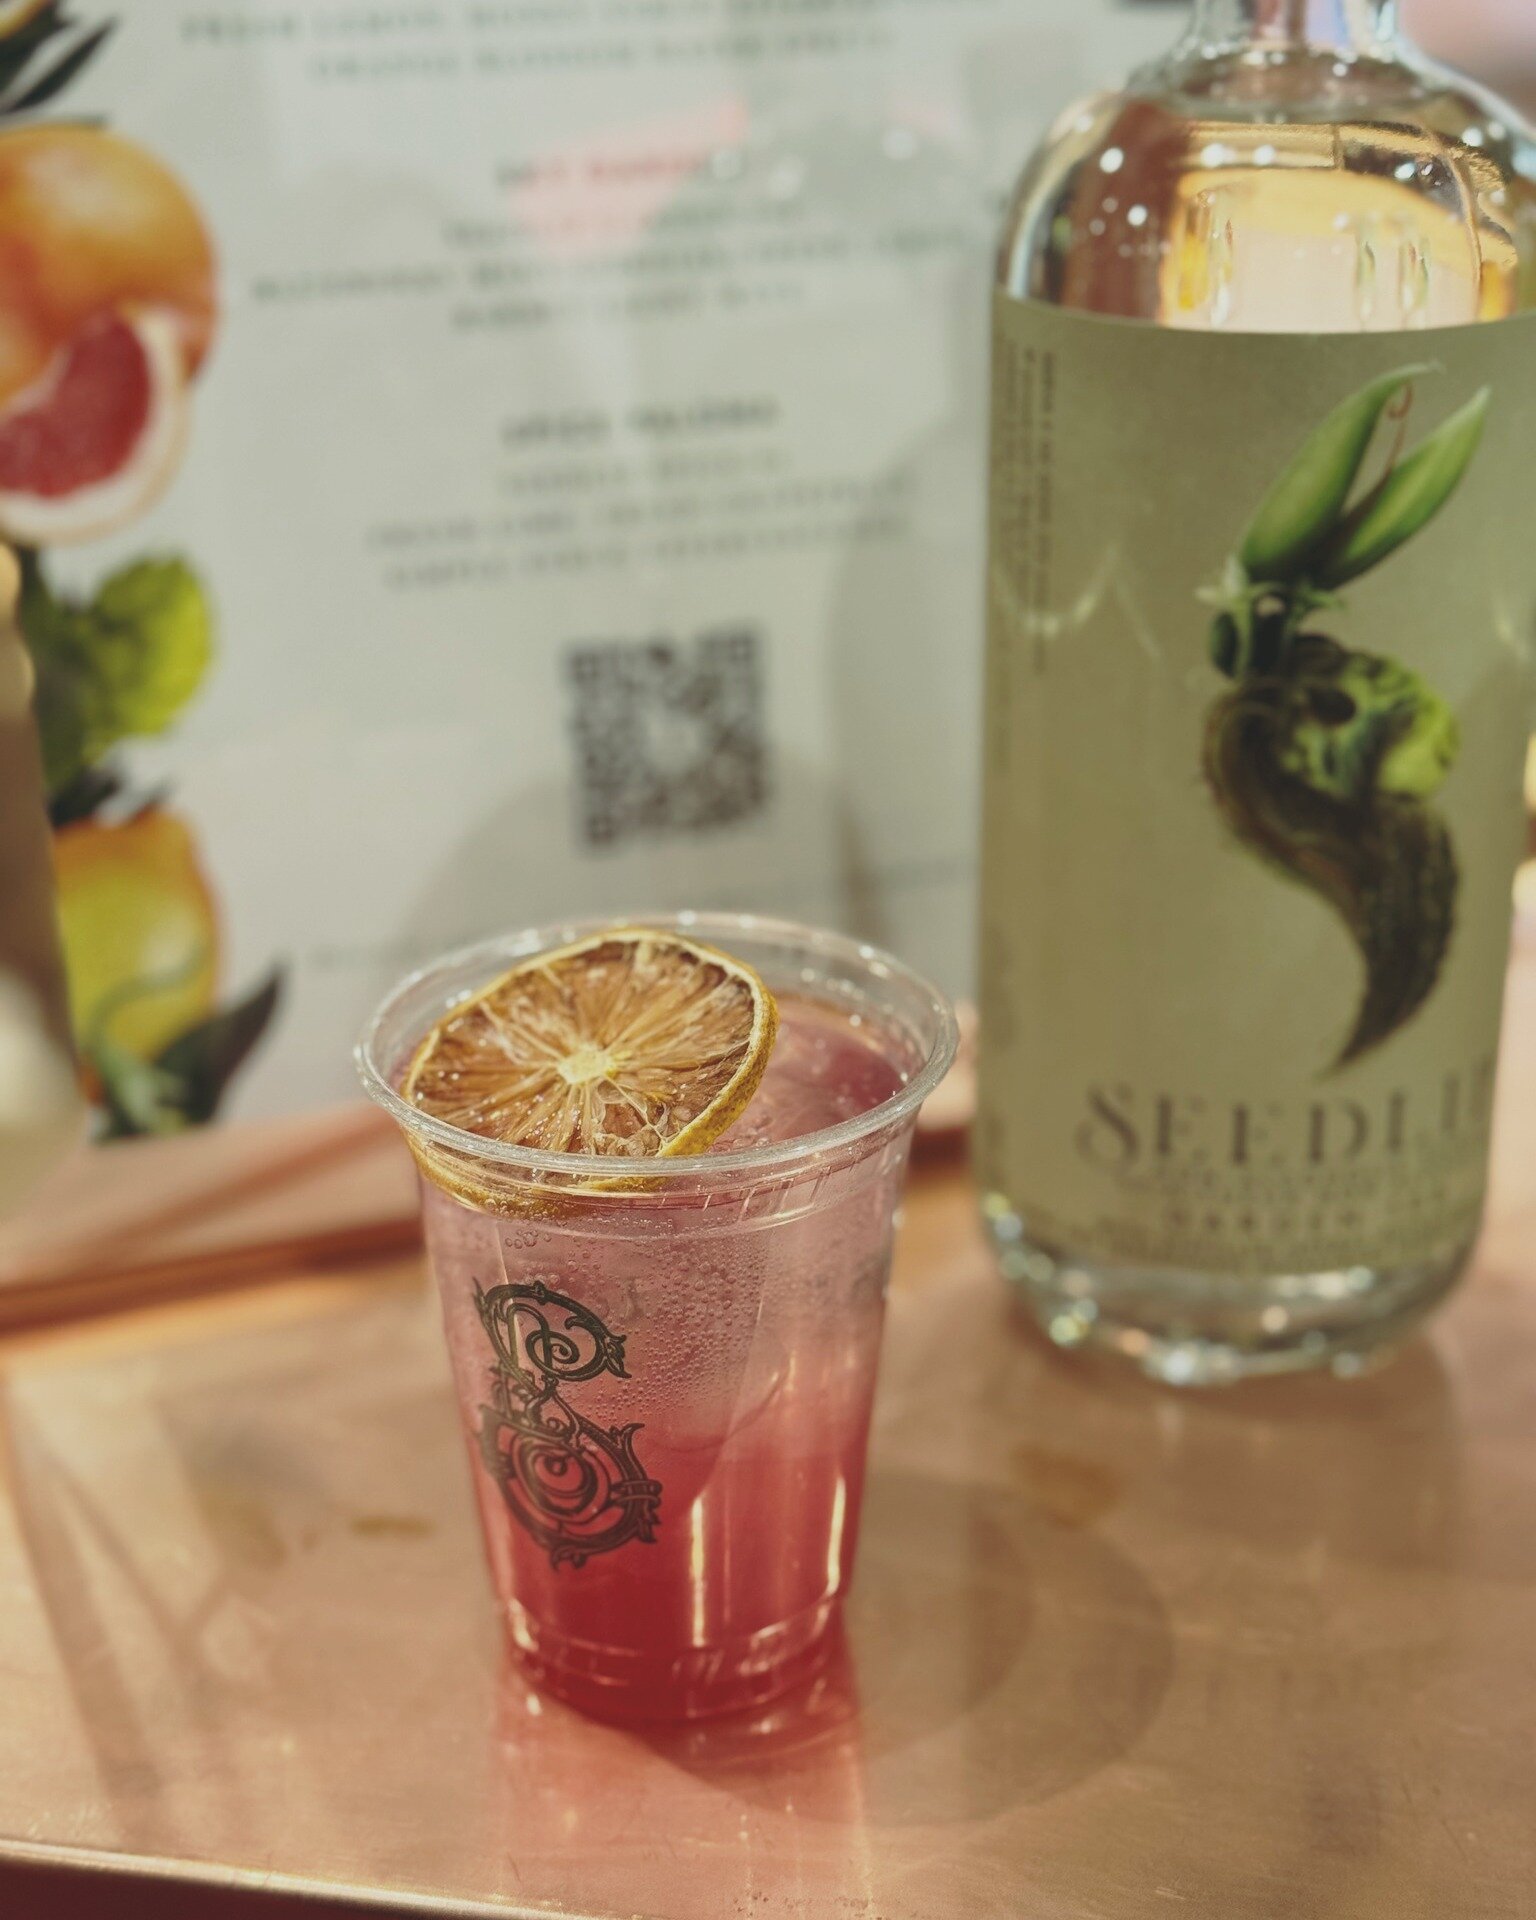 Not being a big fan of alcoholic beverages, I found my drink I can enjoy for any occasion! #Seedlip is the world&rsquo;s first distilled non-alcoholic spirit, solving the ever-growing dilemma of &lsquo;what to drink when you&rsquo;re not drinking.
It